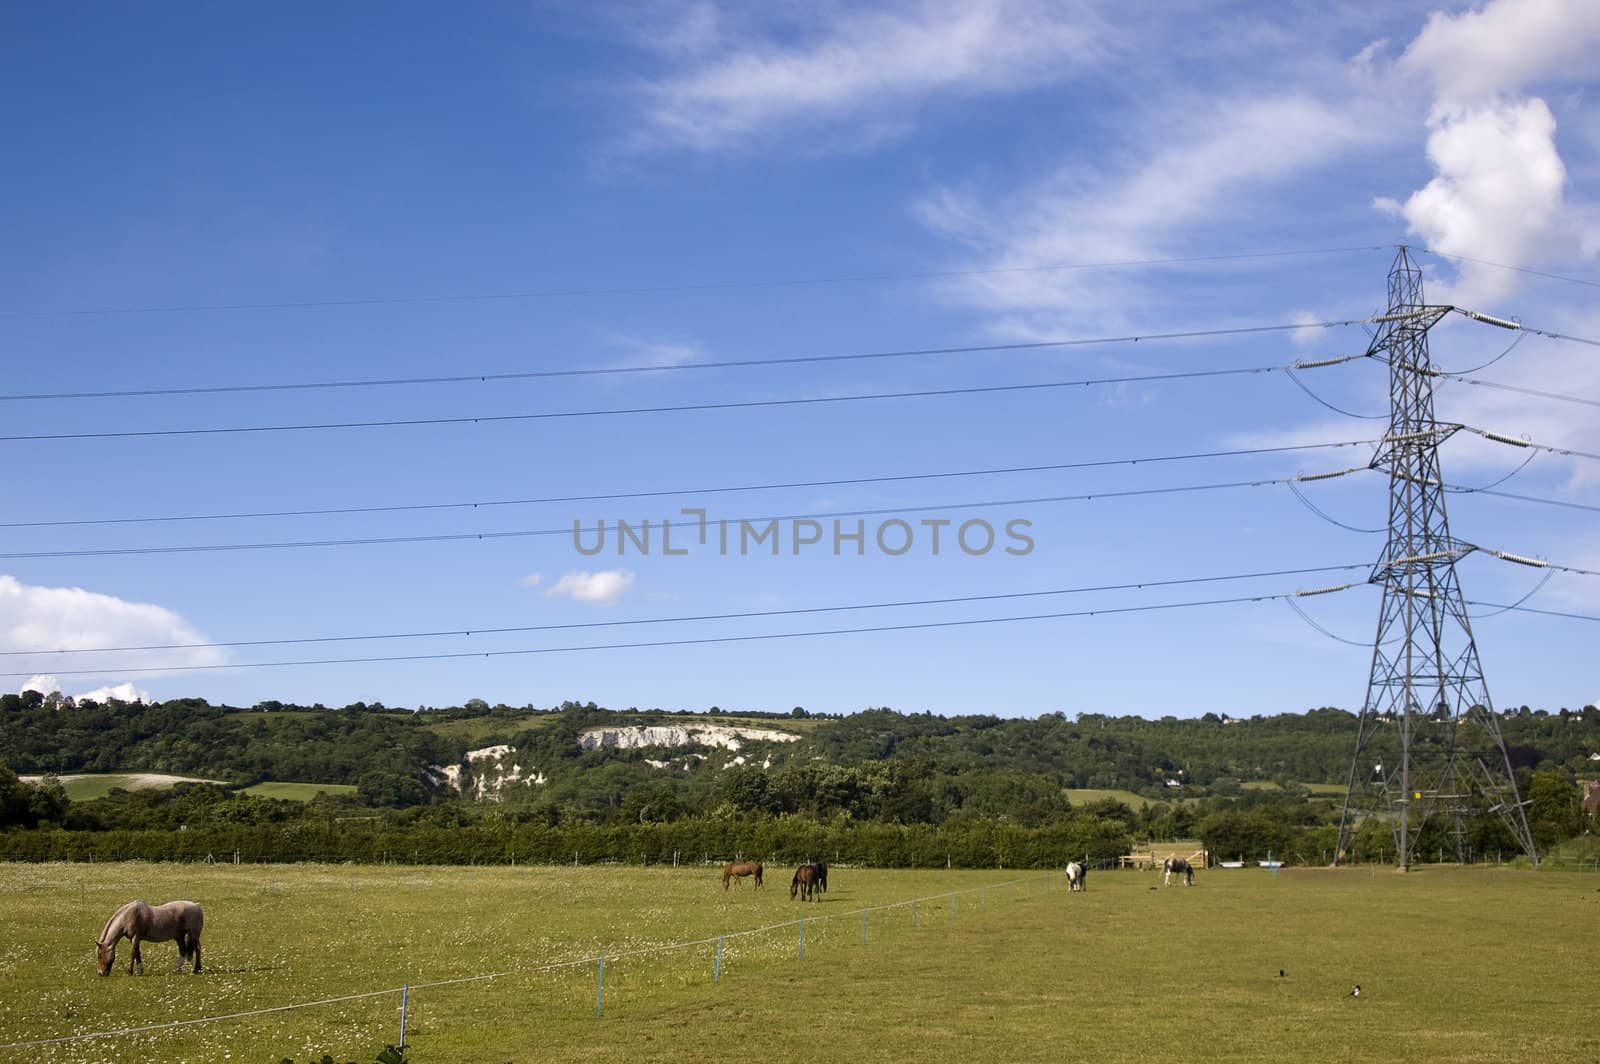 A pylon in a field in the countryside